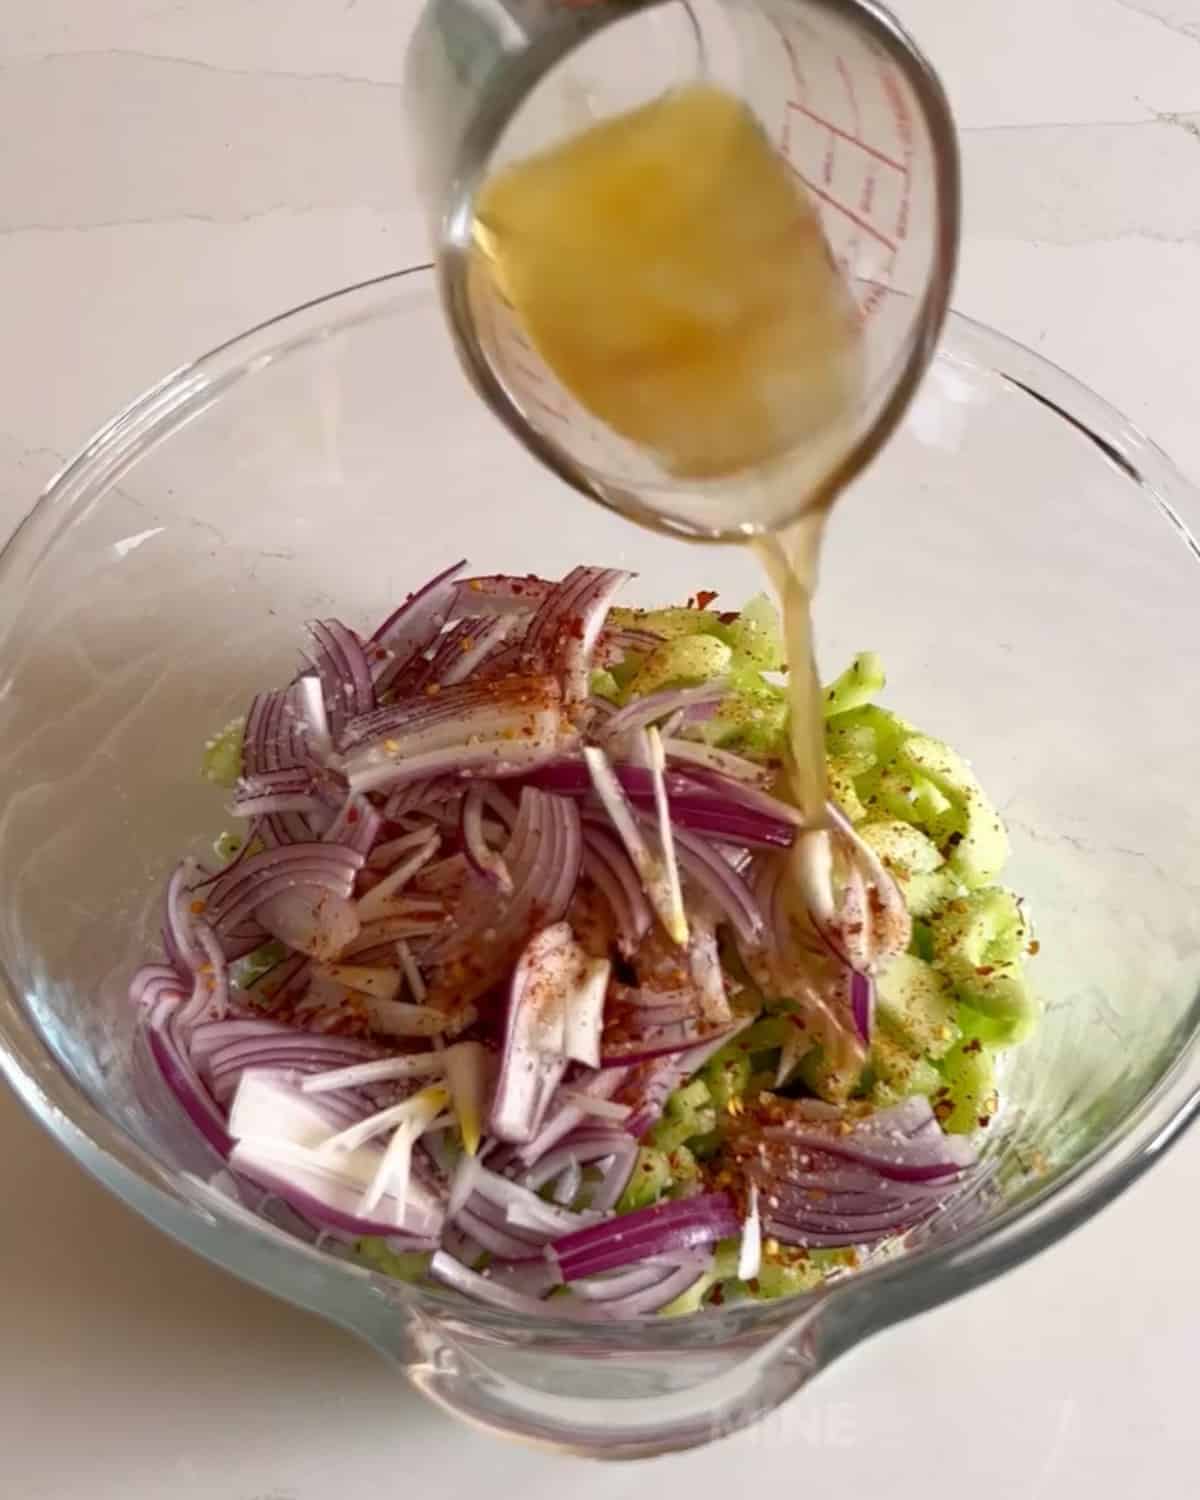 Dressing being poured over cucumber salad in a mixing bowl.